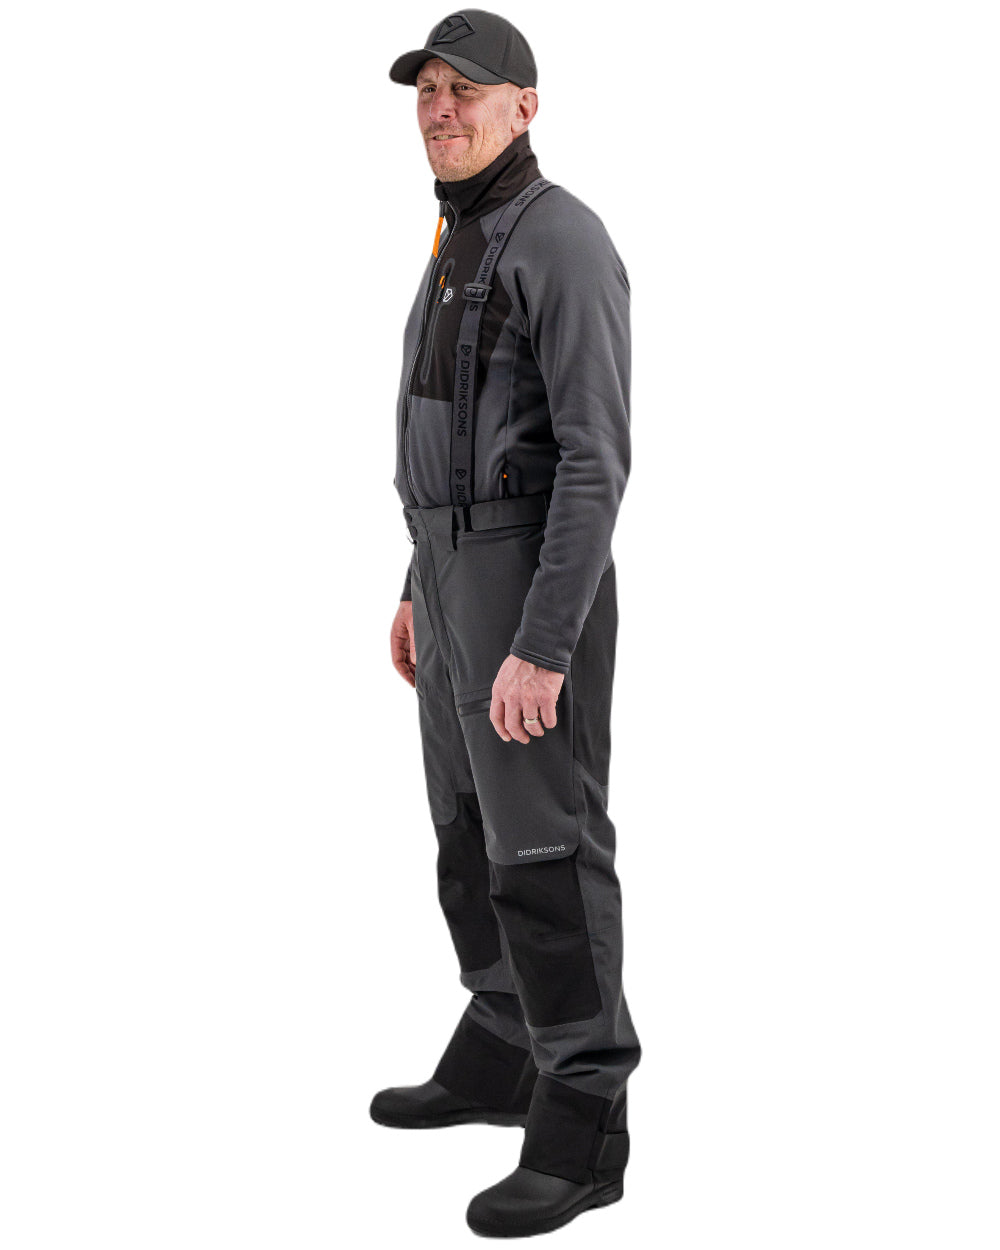 Coal Black Coloured Didriksons Fractus Pant On A White Background